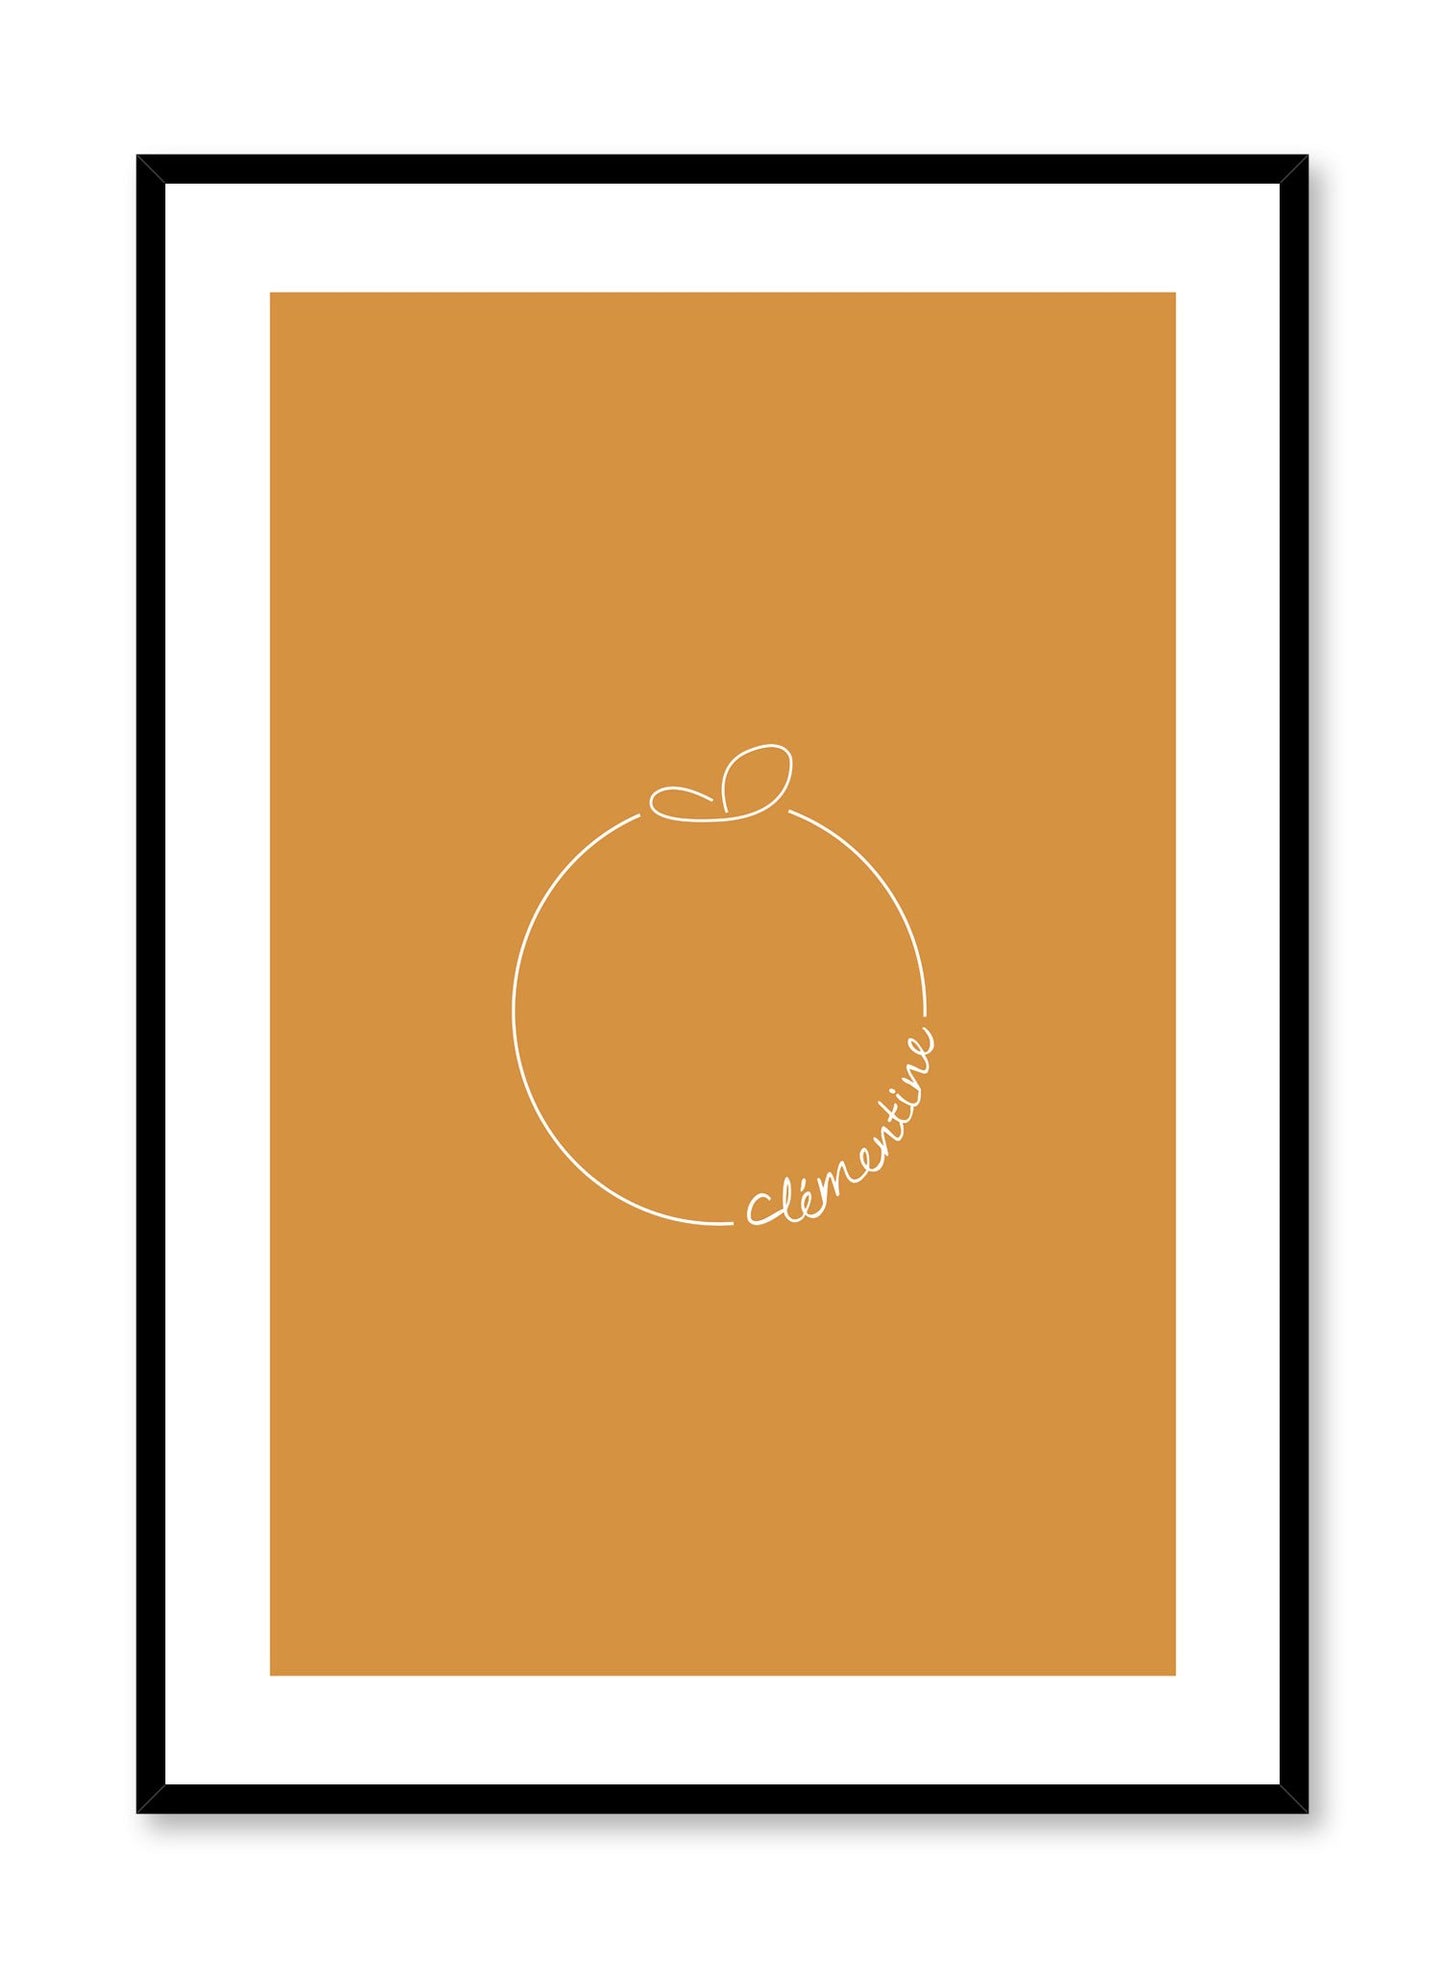 Minimalist poster by Opposite Wall with Clementine orange illustration